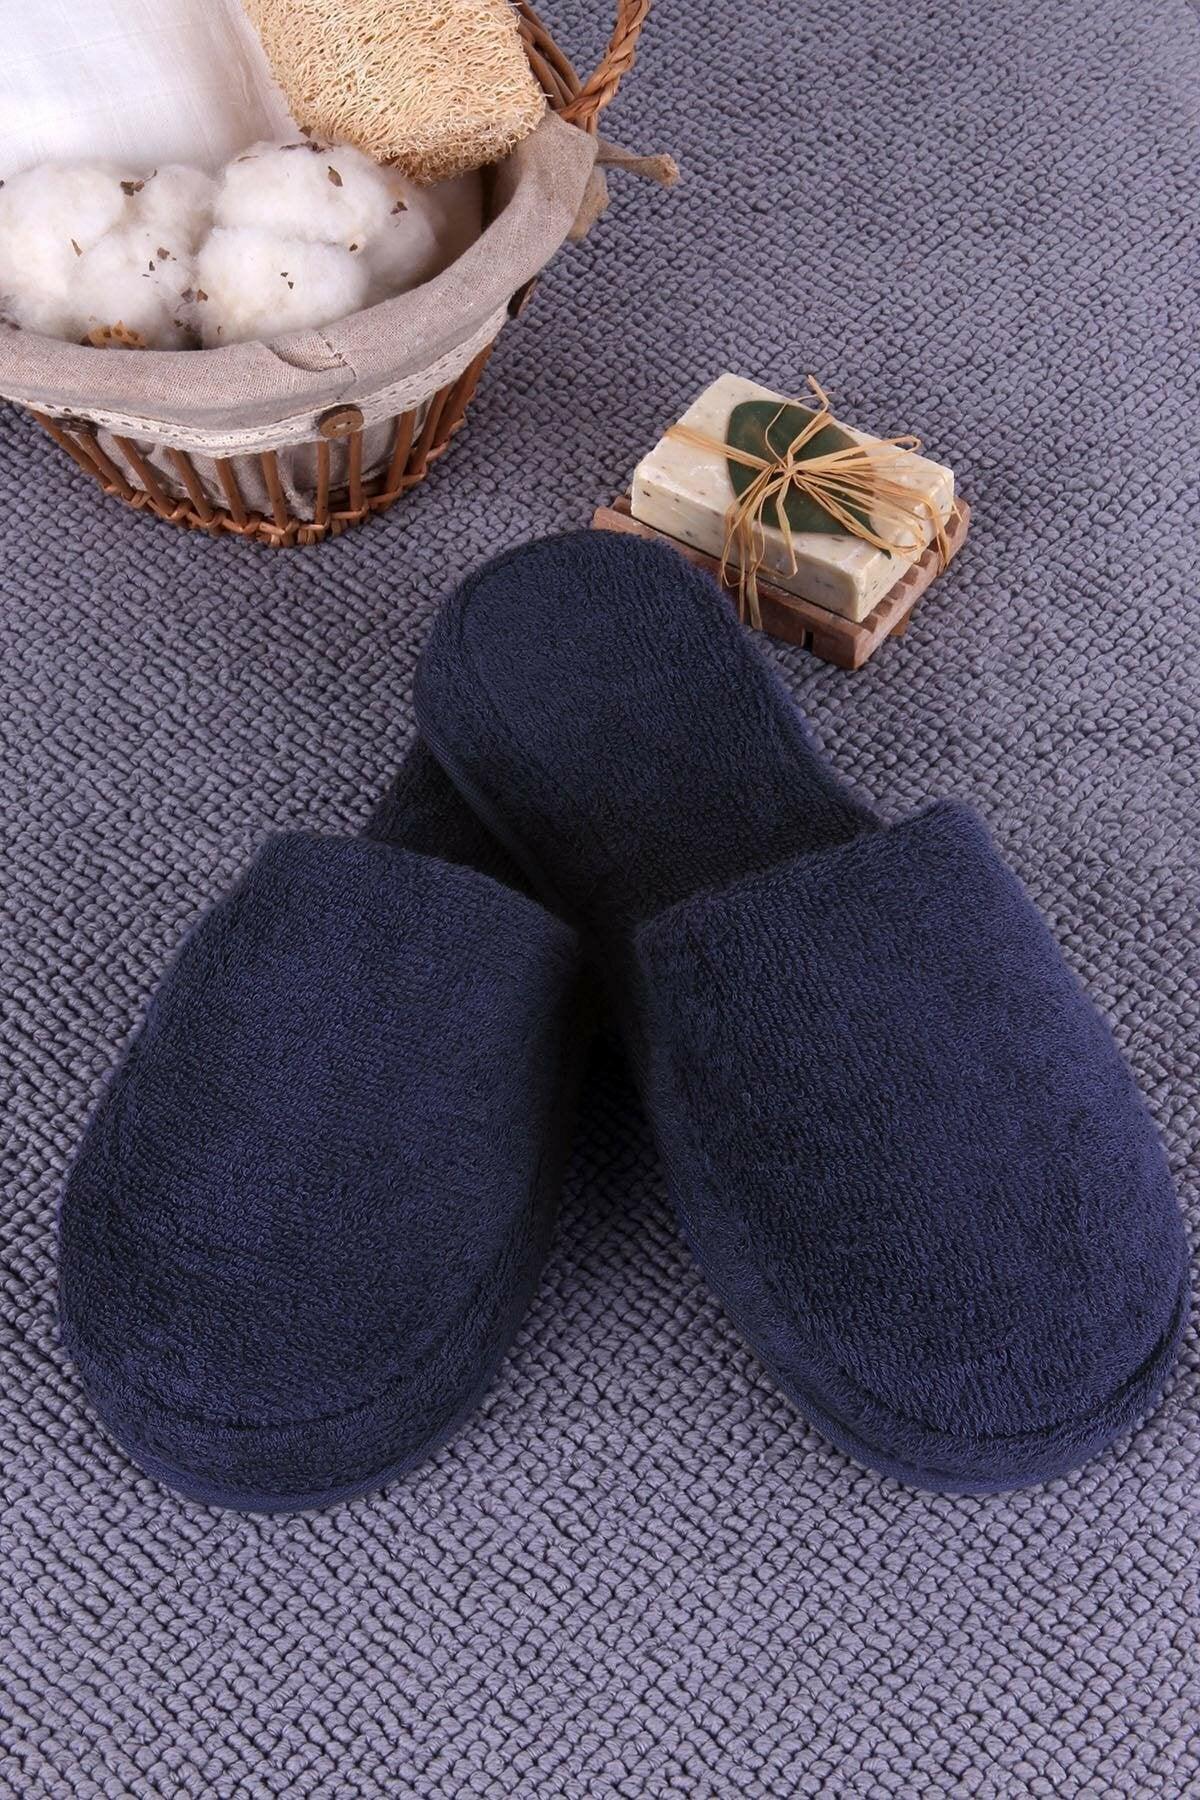 Fluffy  Bamboo Cotton  Slippers Navy - sinnohome 